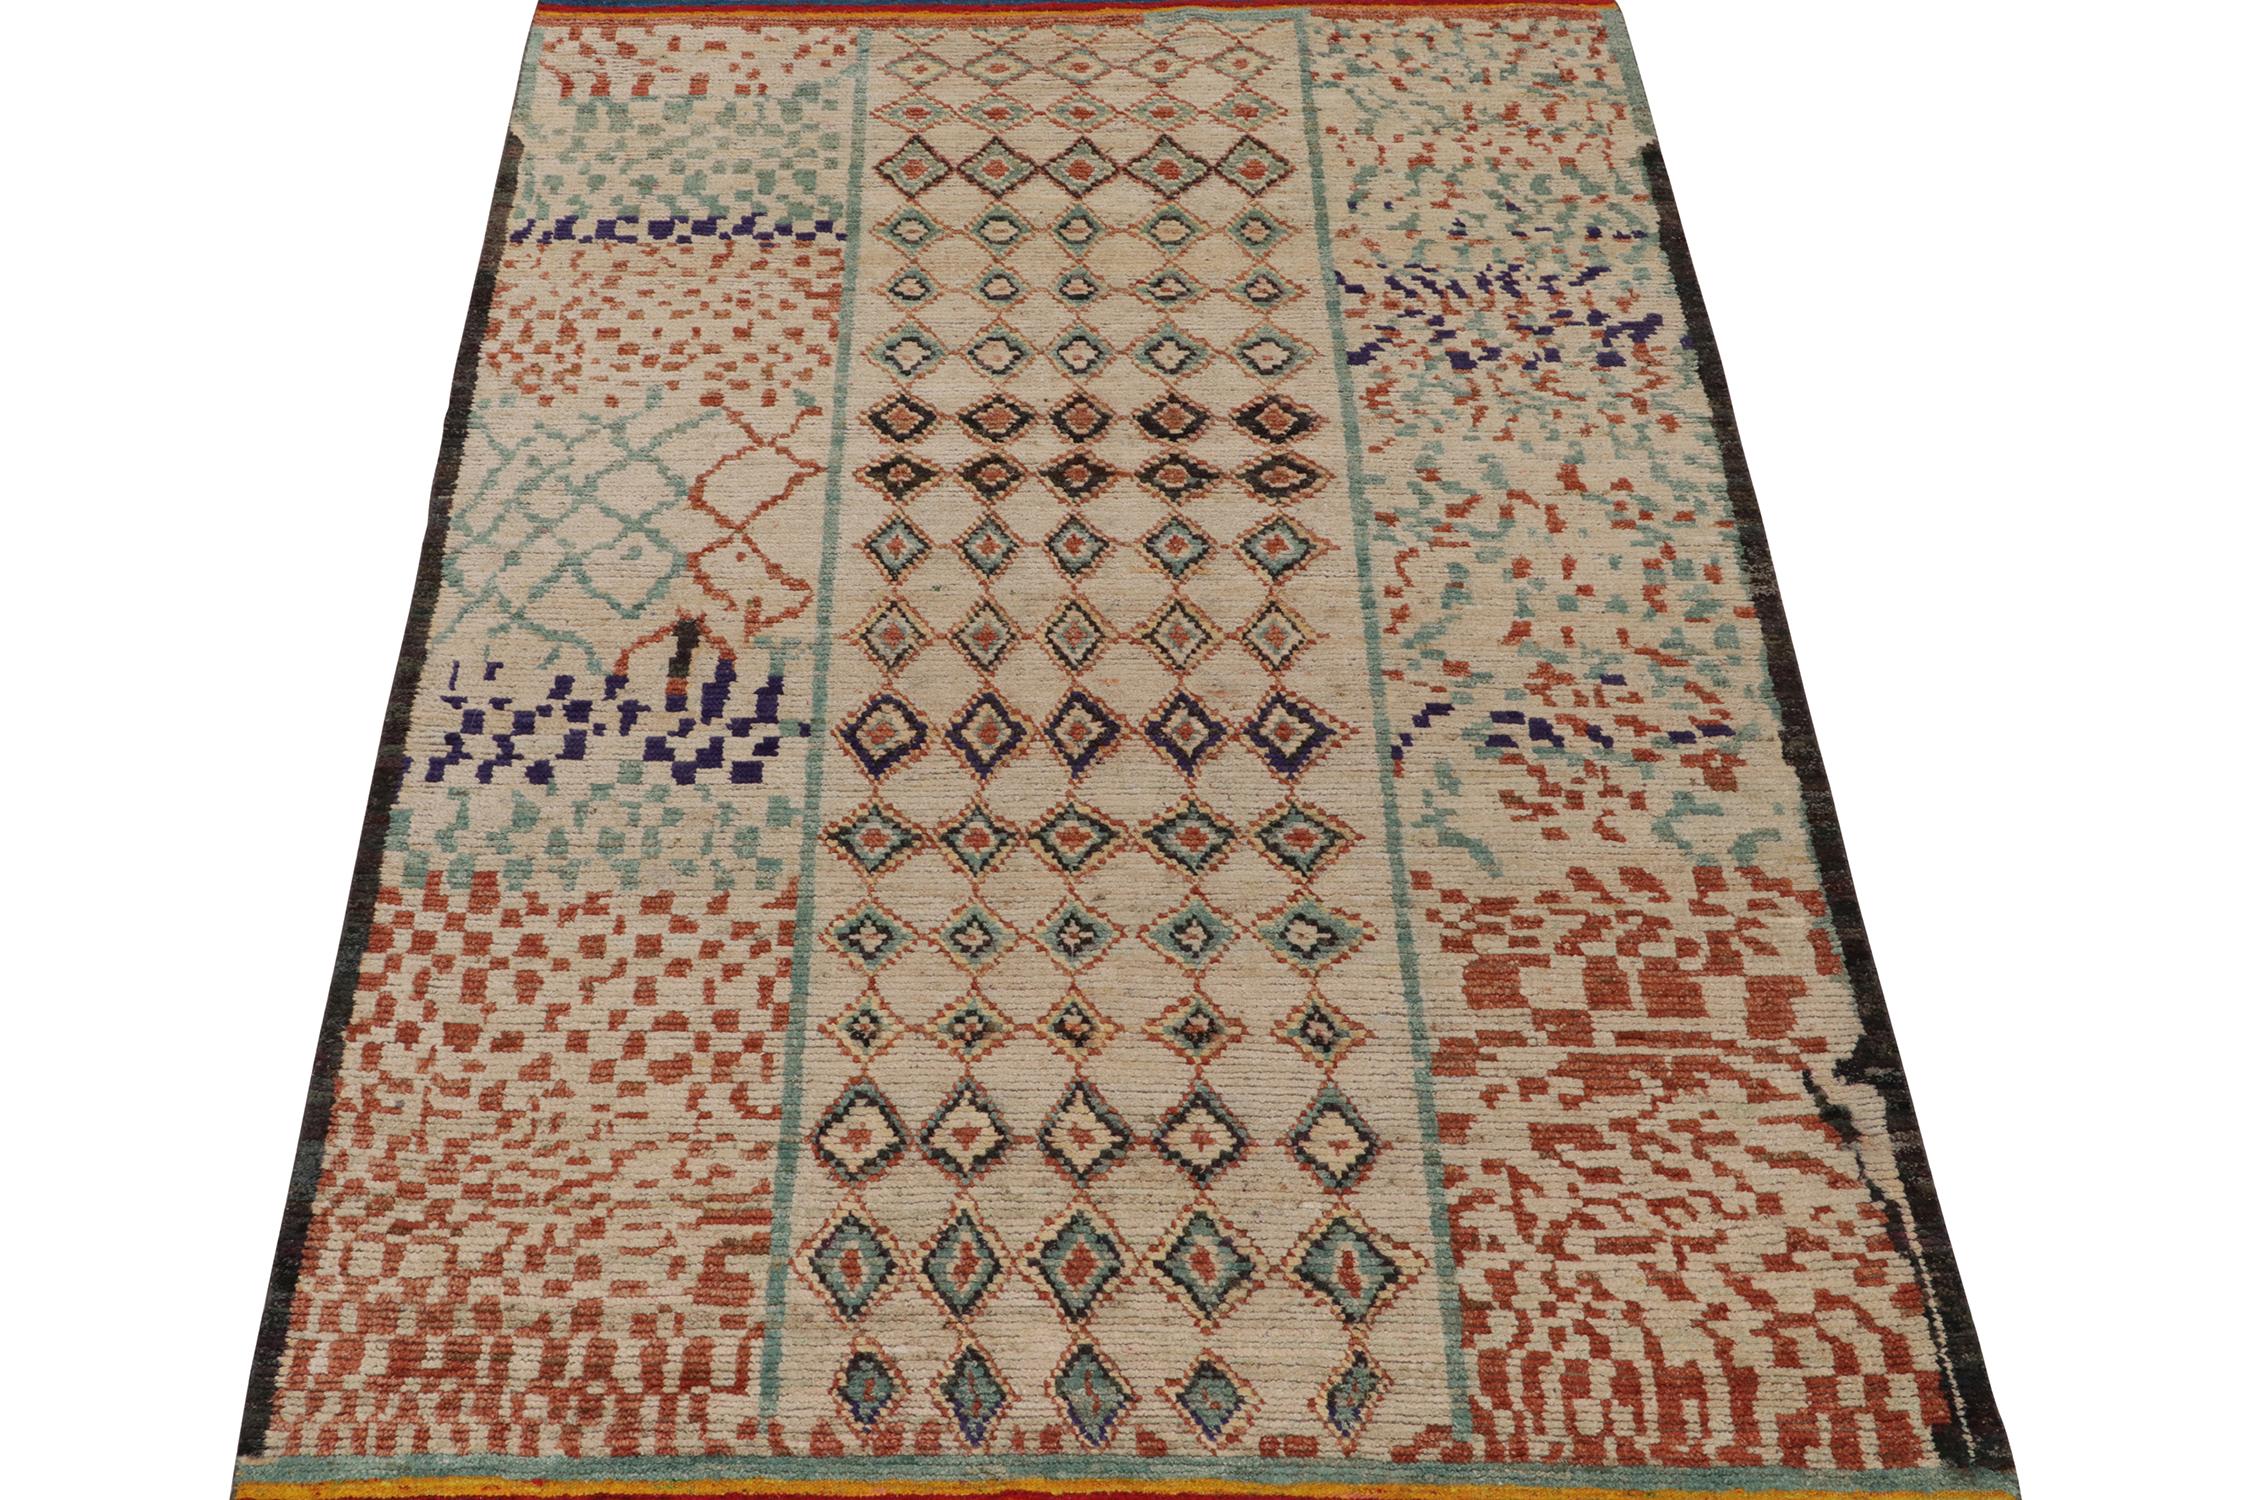 Tribal Rug & Kilim’s Moroccan Style Rug in Beige, Red and Blue Geometric Patterns For Sale